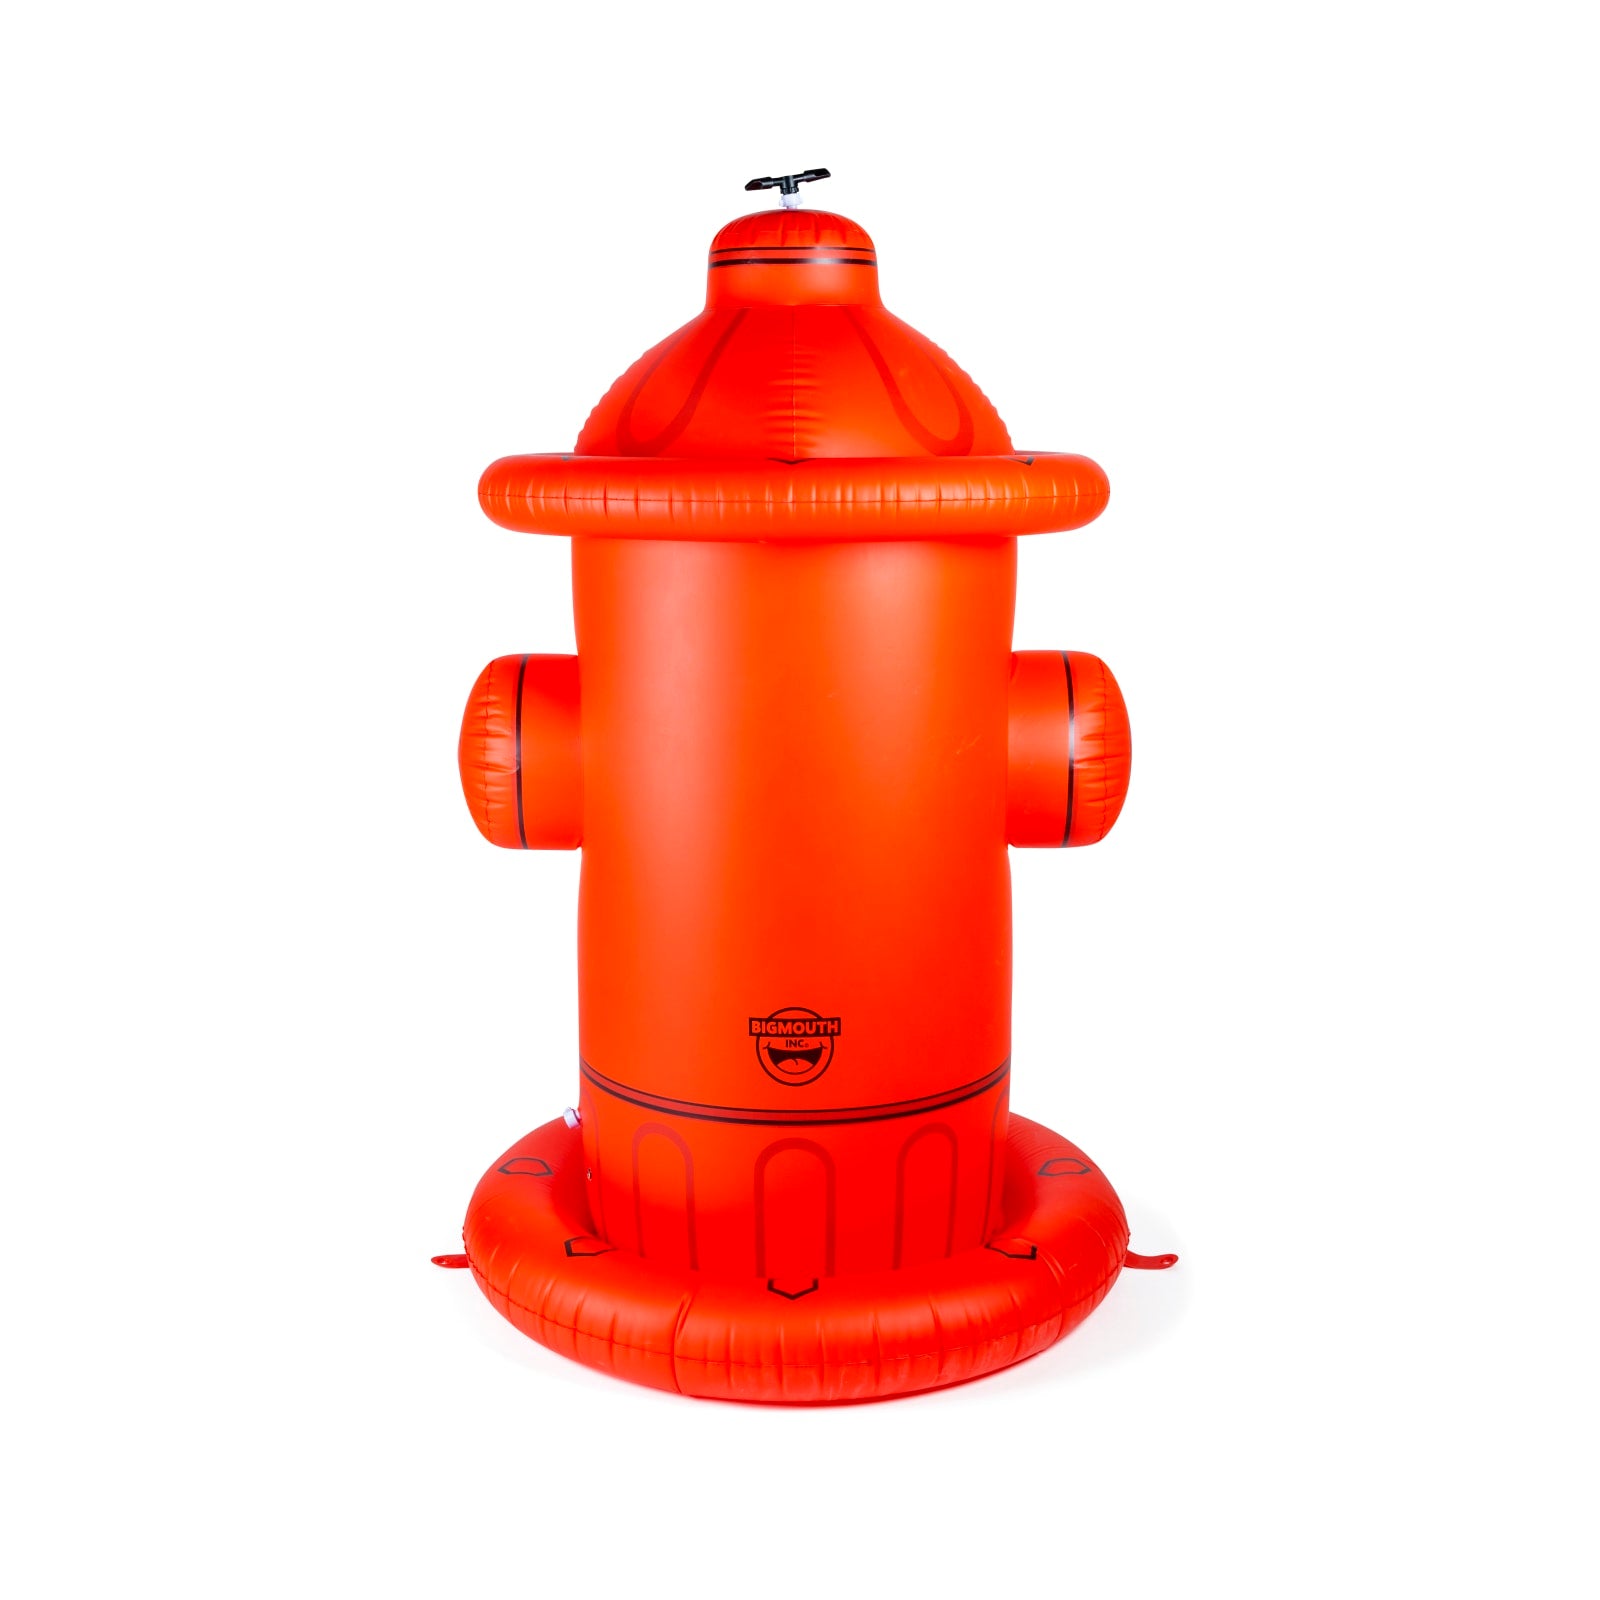 Ginormous Fire Hydrant Yard Sprinkler